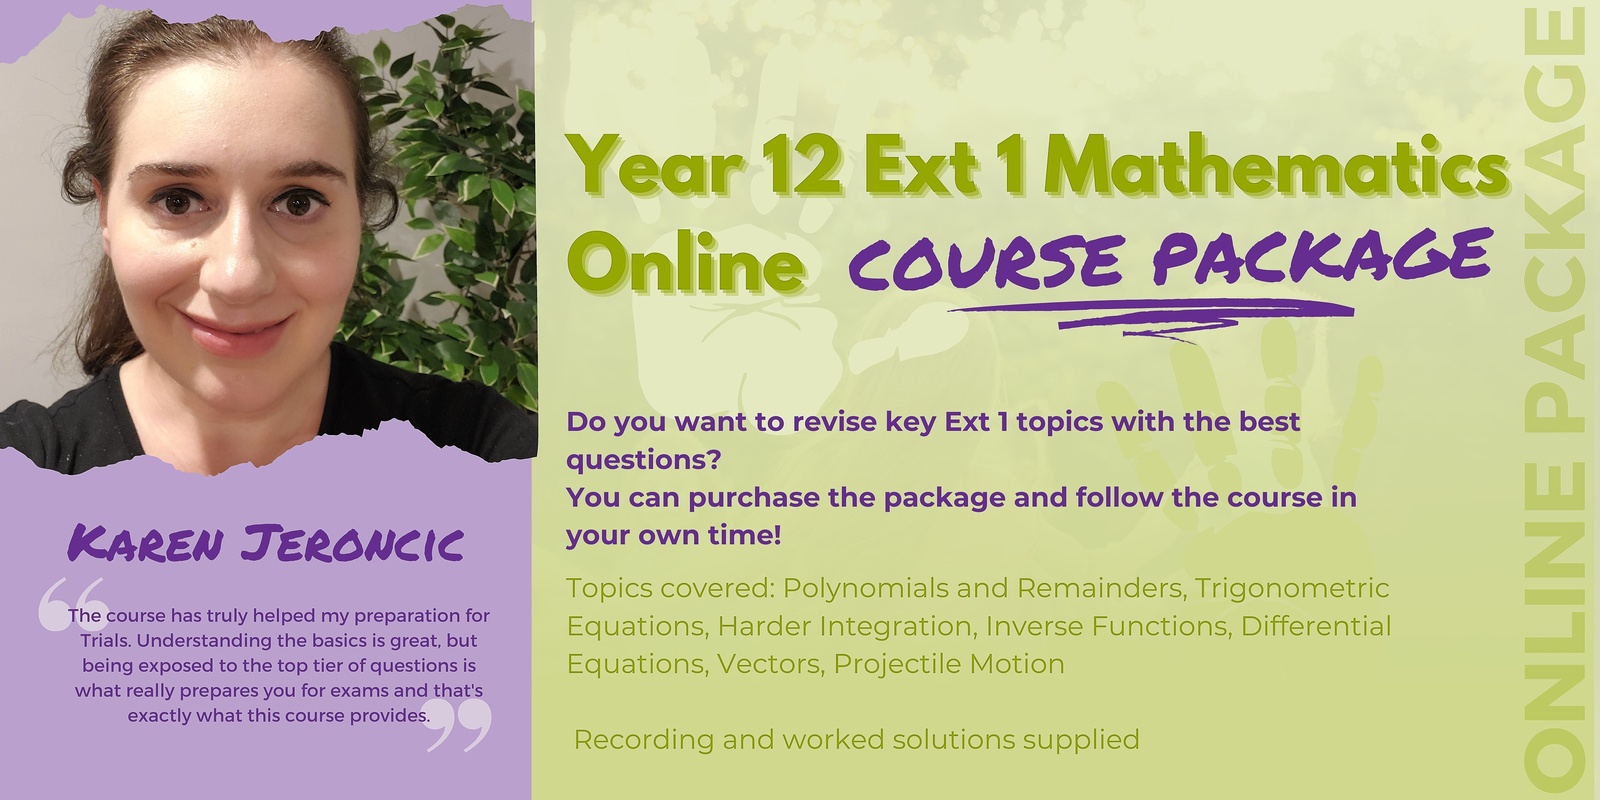 Banner image for Year 12 Extension 1 Mathematics Package covering Polynomials, Trig Equations, Inverse Functions, Vectors, Differential Equations and Projectiles